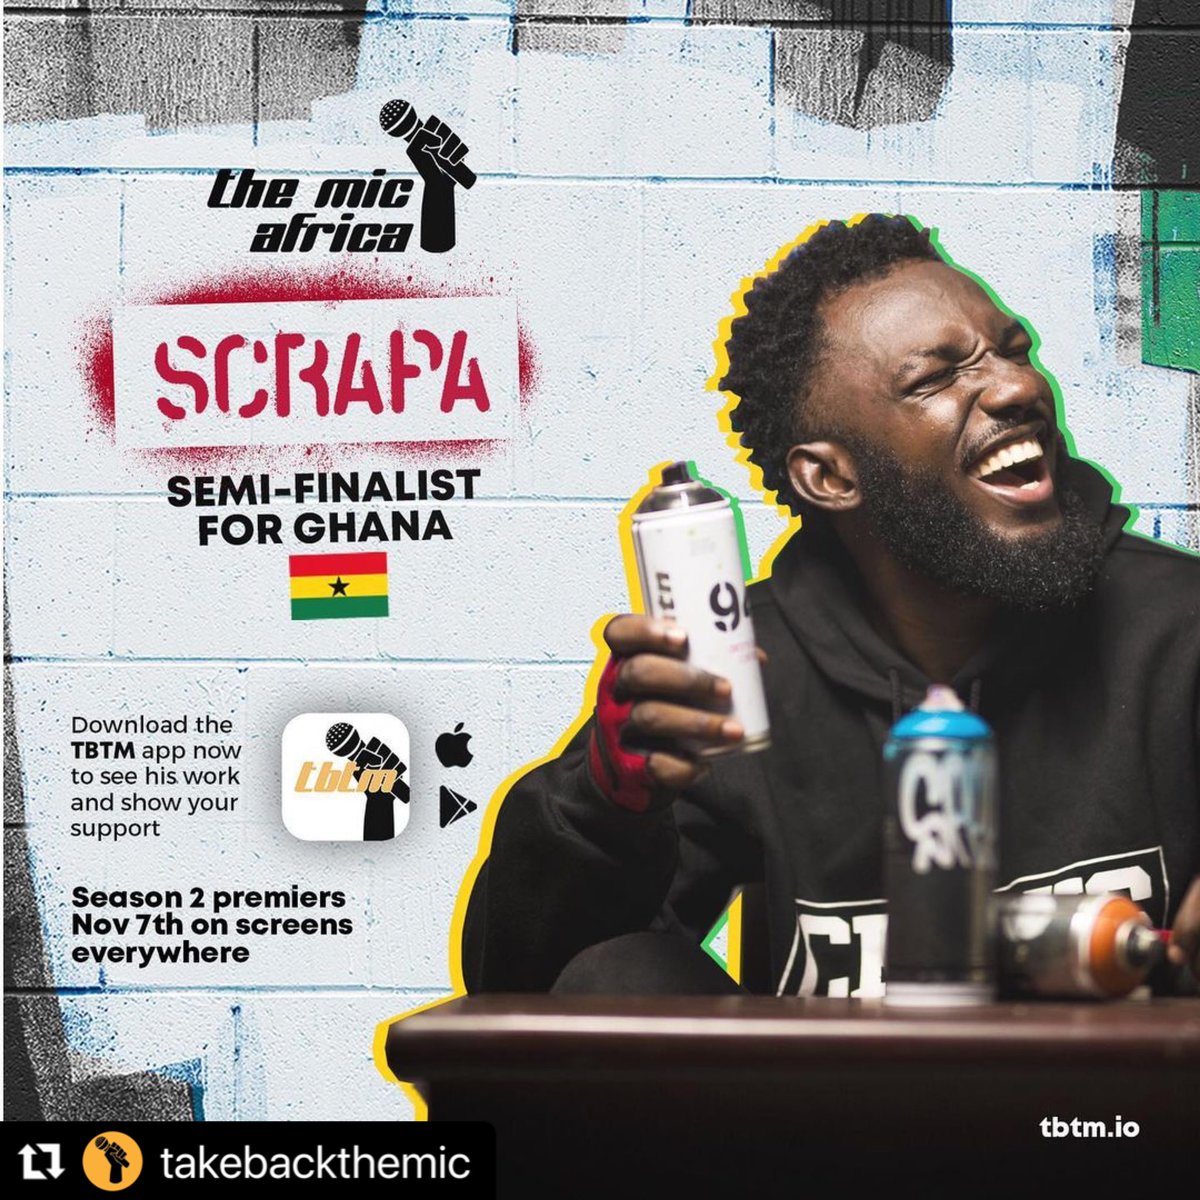 @takebackthemic
Hey Ghana! Let’s wise up on the Hip Hop Culture in your country with @scrapa2020 
Scrapa on the TBTM app
tbtm.io/m/u/scrapa2020
 
#TBTM #TheMicAfrica #hiphopis #Season2  #Ghana